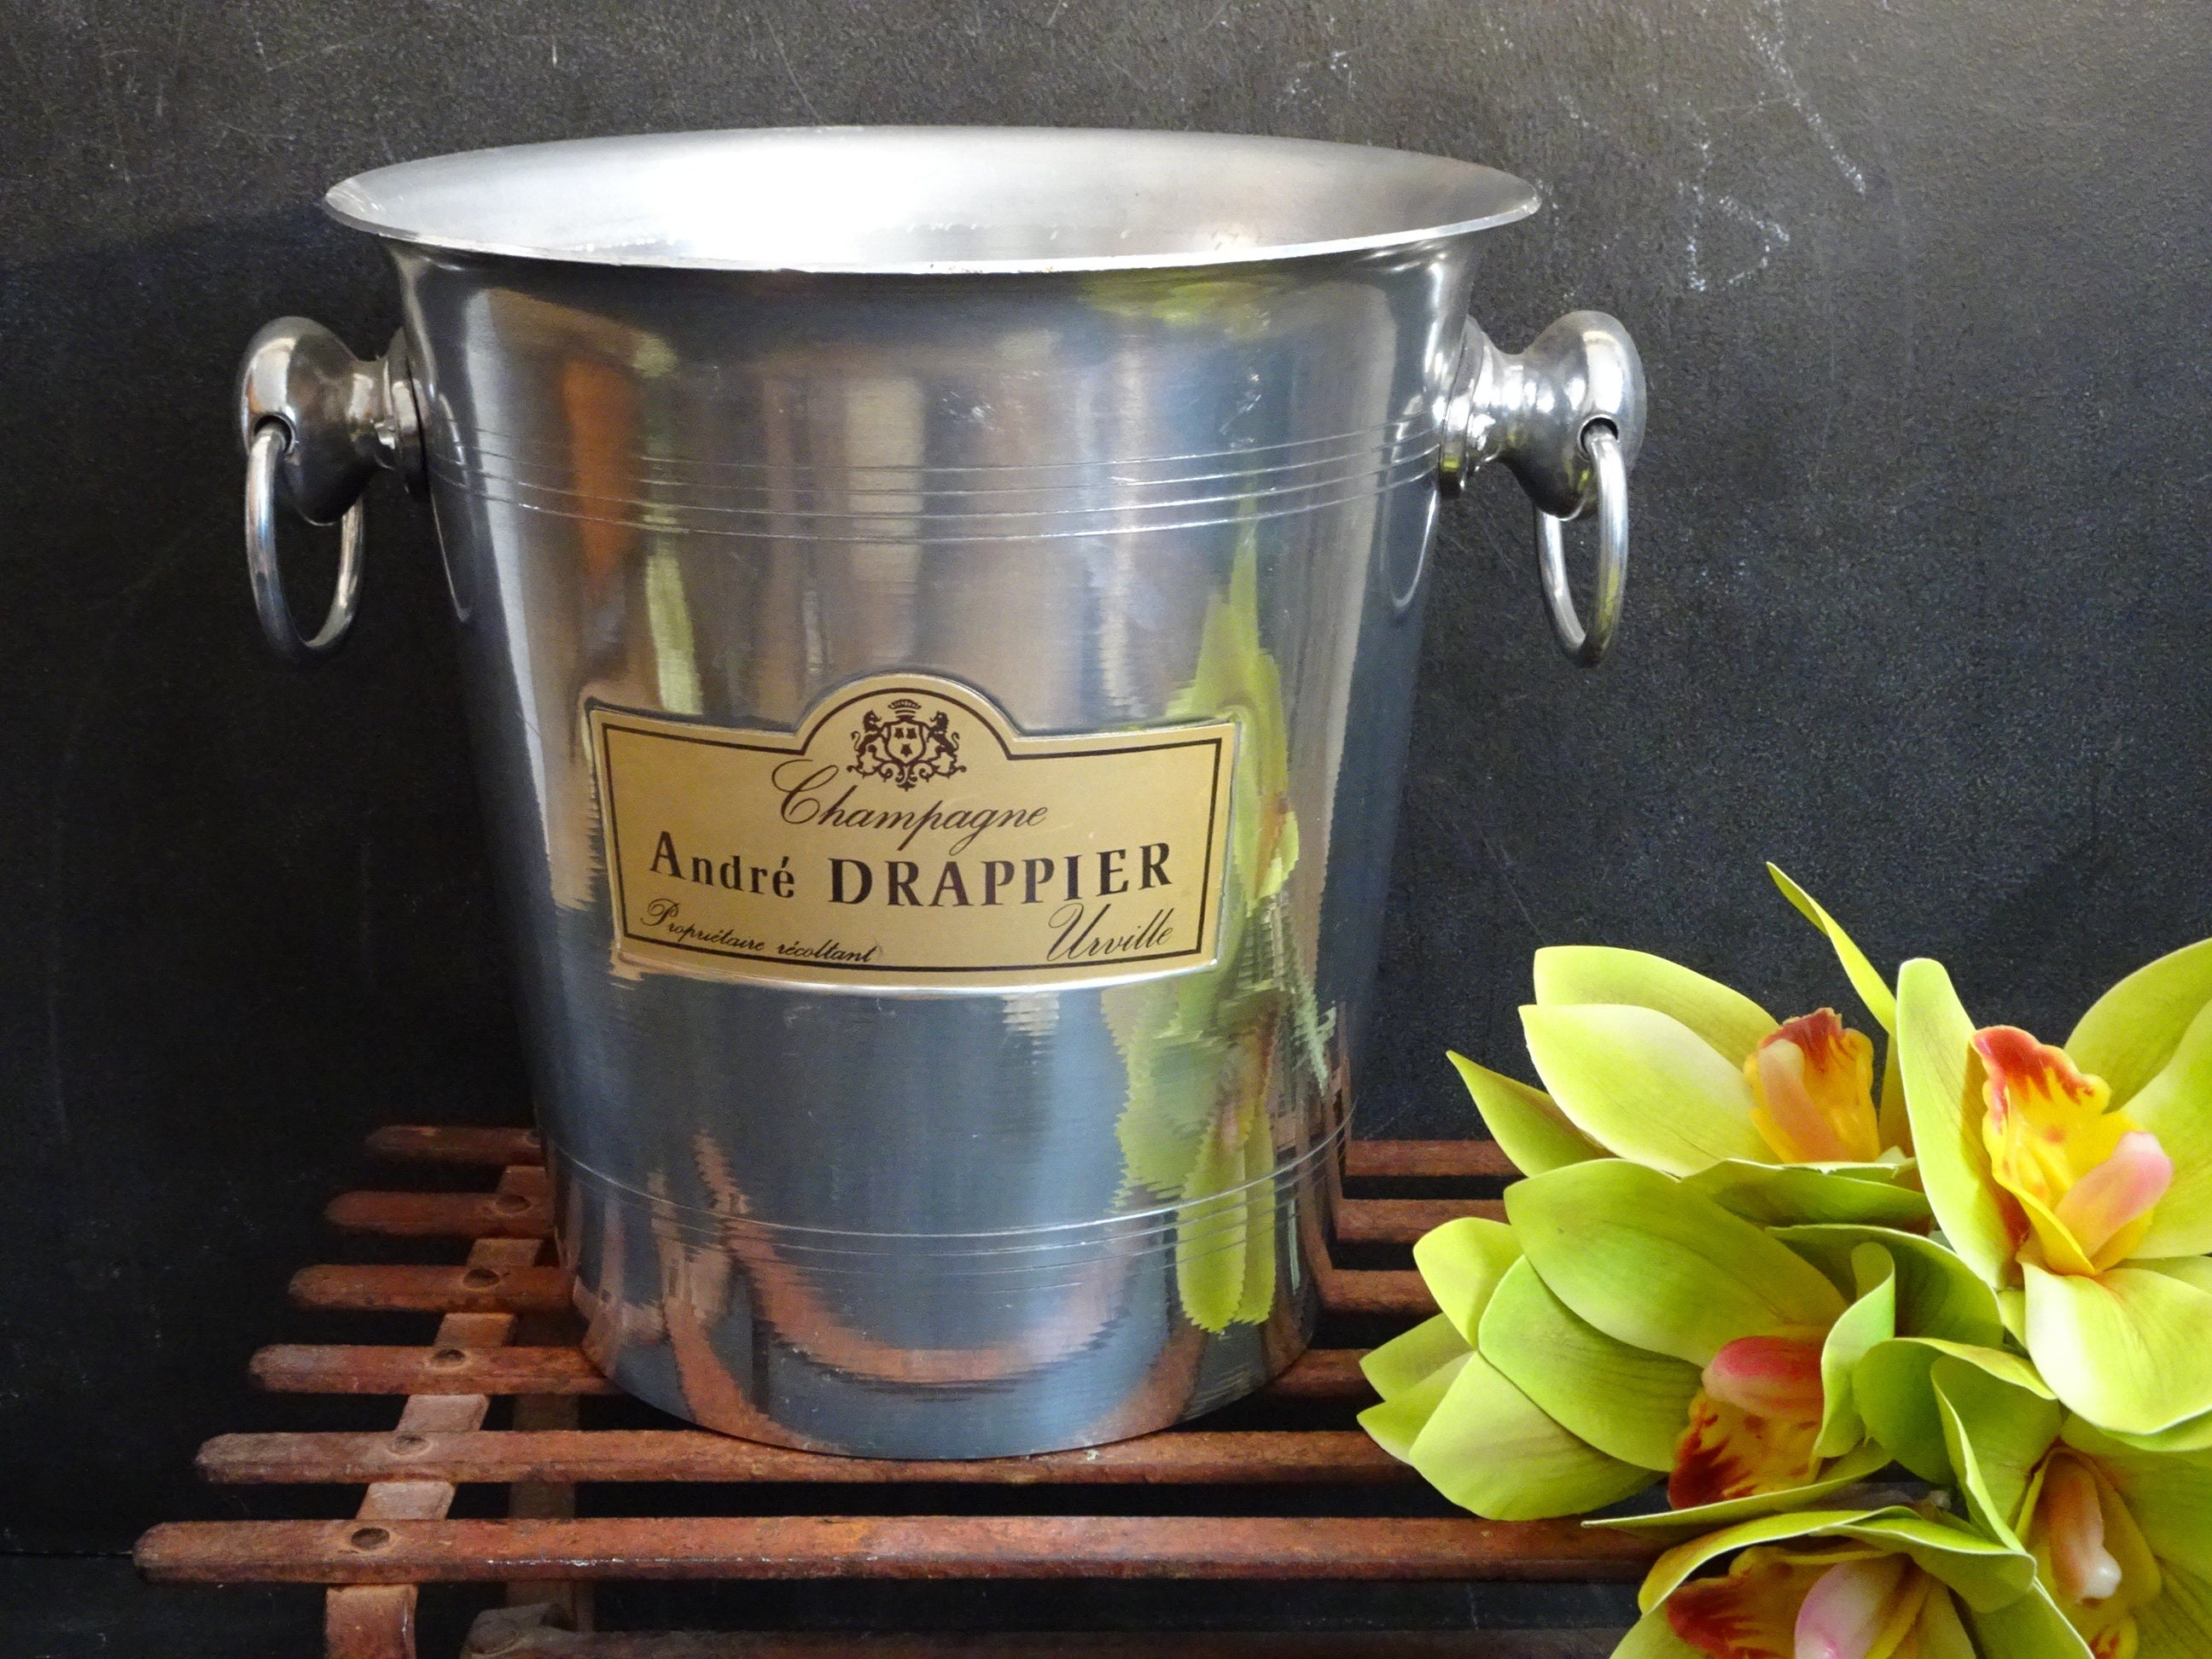 Vintage Champagne Bucket. André Drappier